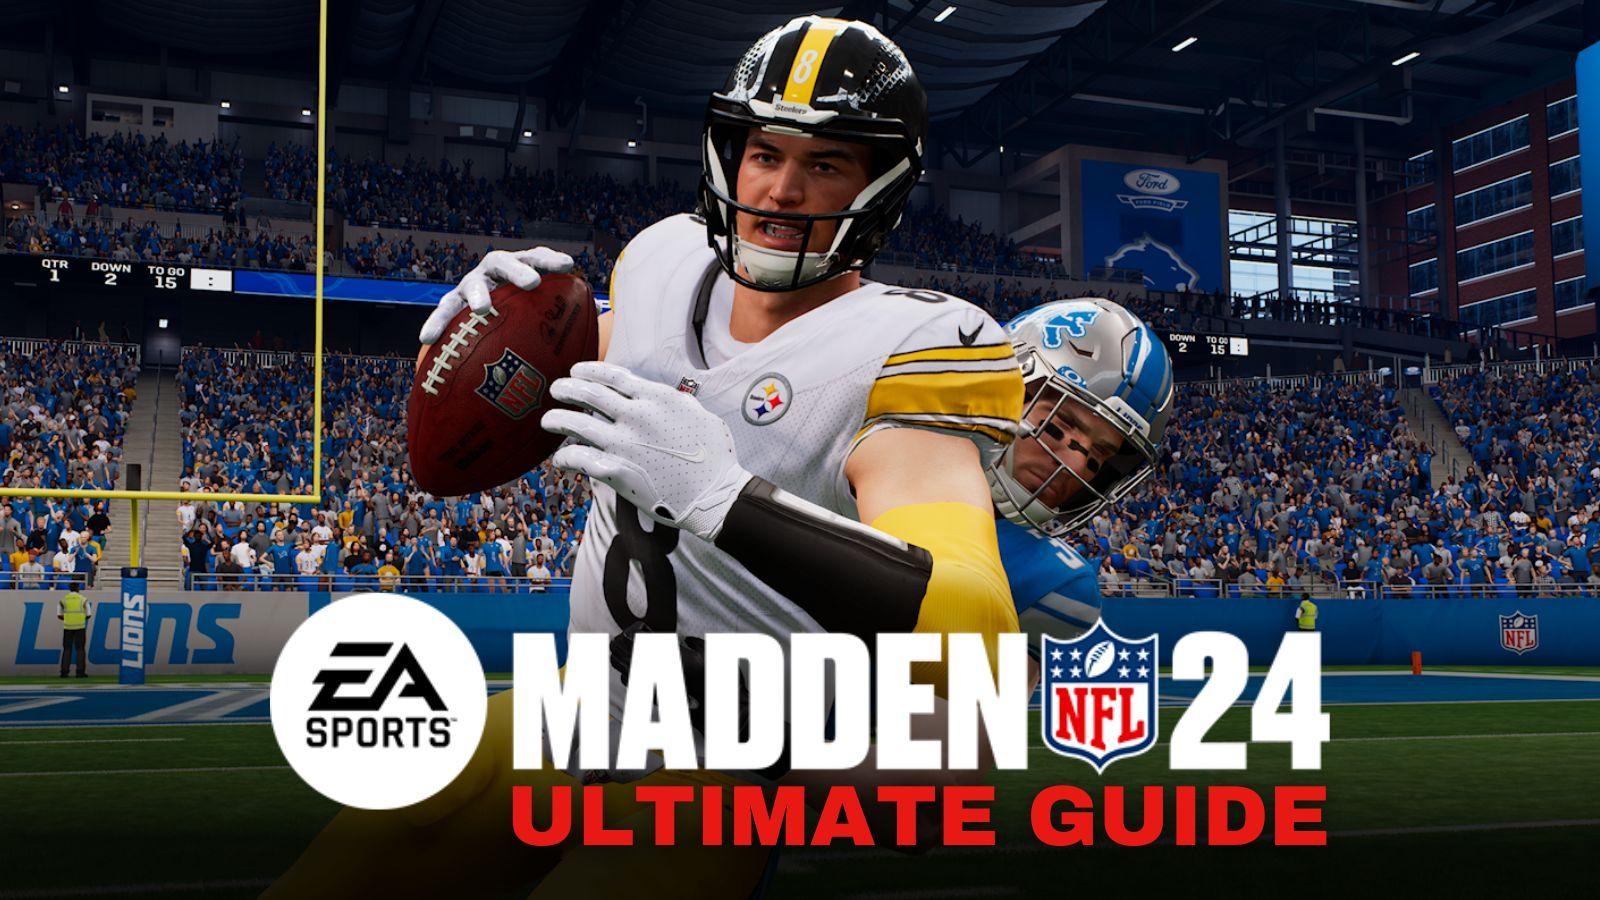 Madden 24 Guide - How To Pass The Ball in Madden 24